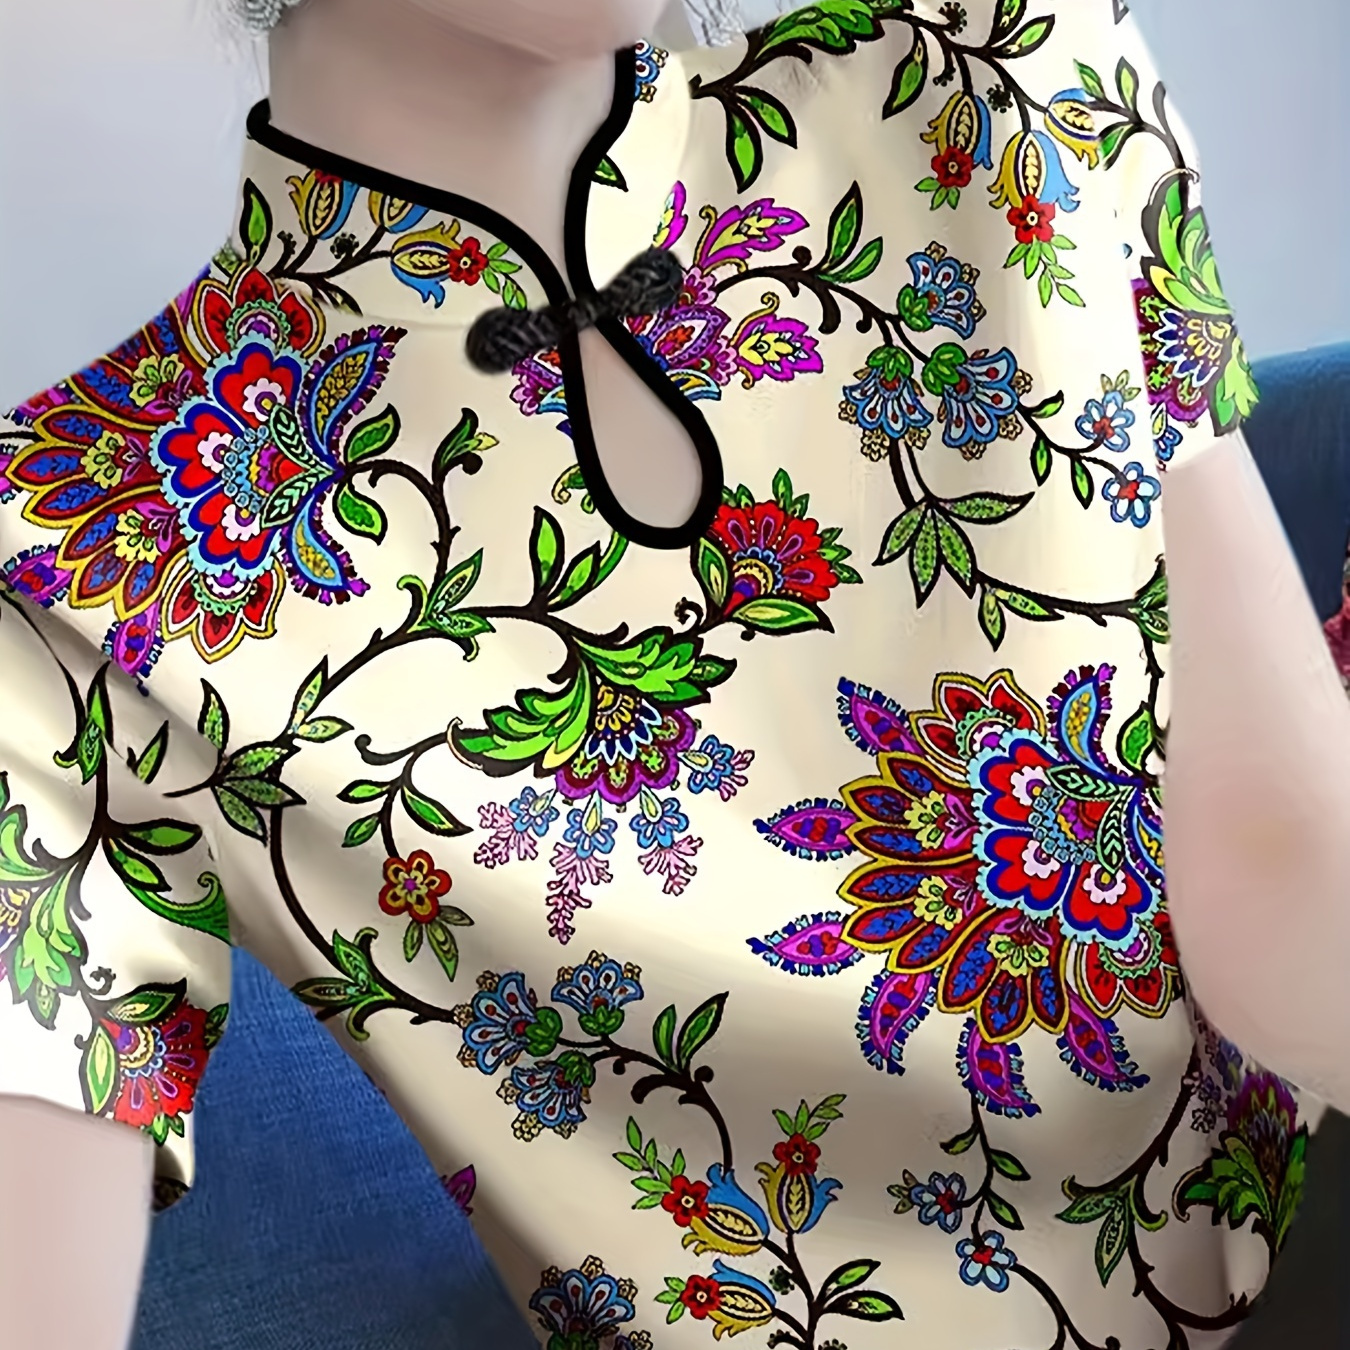 

Floral Print Band Collar T-shirt, Chinese Style Plate Buckle Keyhole Short Sleeve Top For Spring & Summer, Women's Clothing